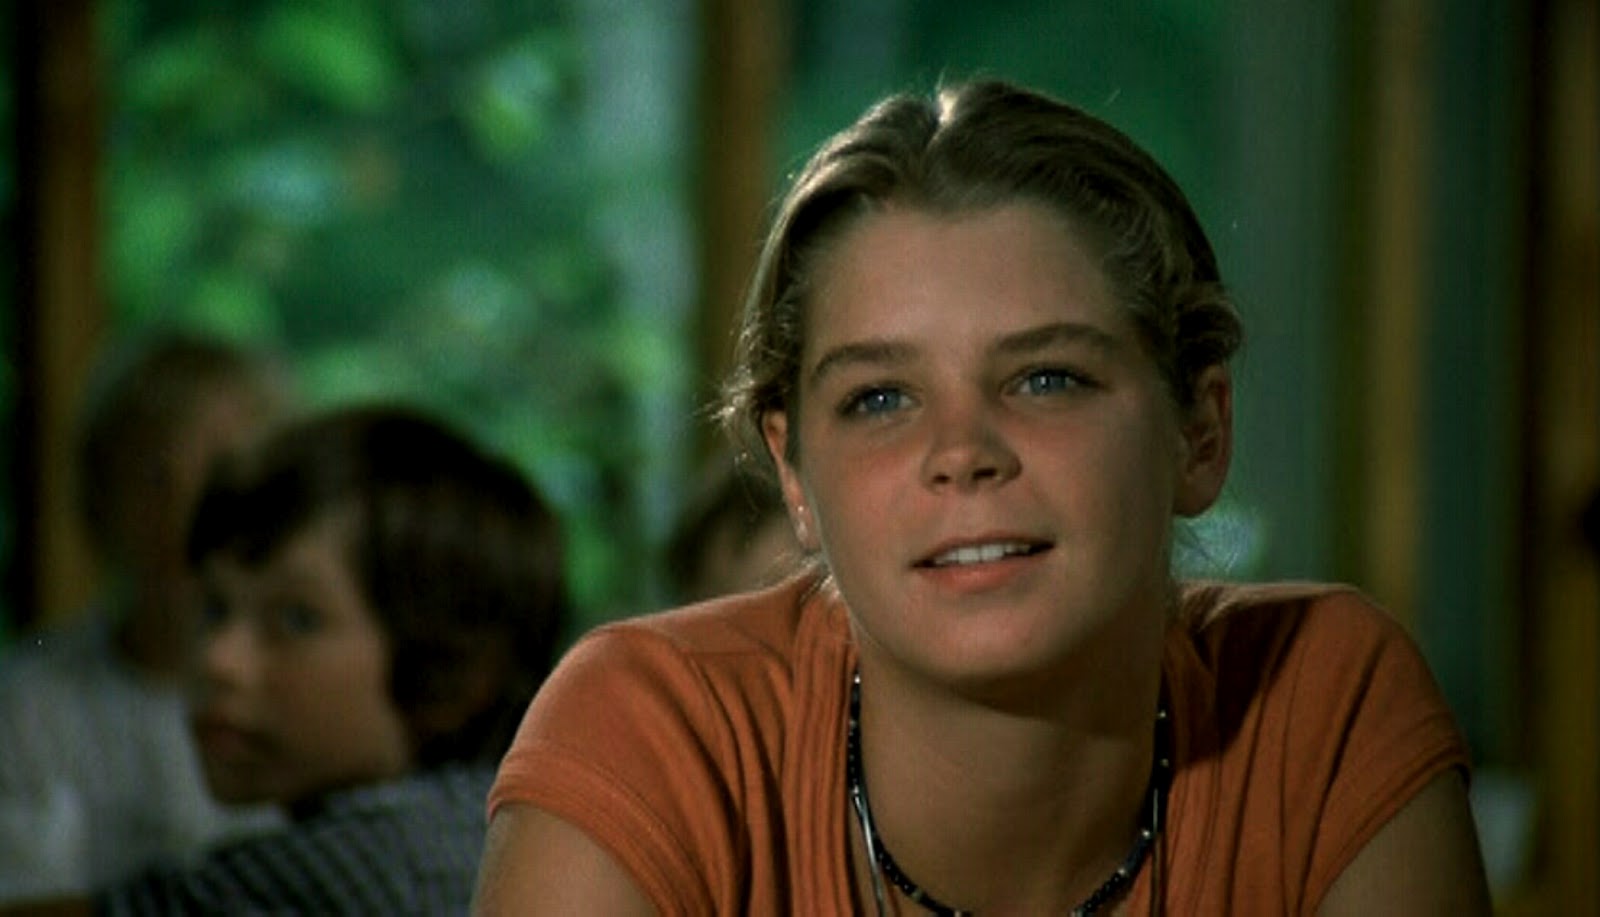 Revisiting camp w/ kristine debell: a 'Meatballs' interview.